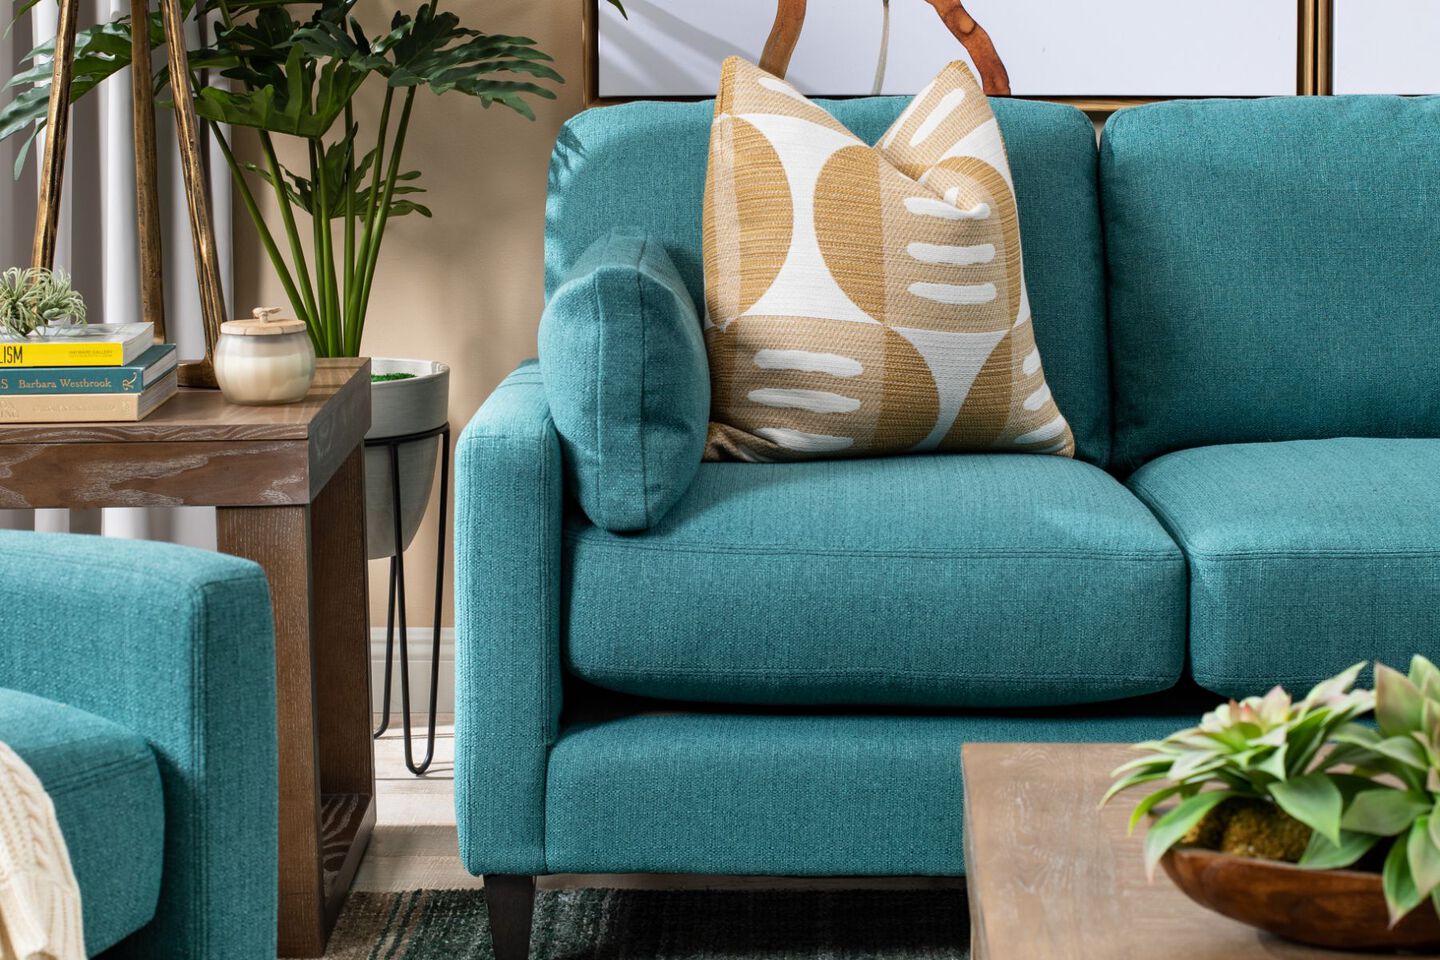 Living room with side table, coffee table, and teal blue couch with a yellow pillow